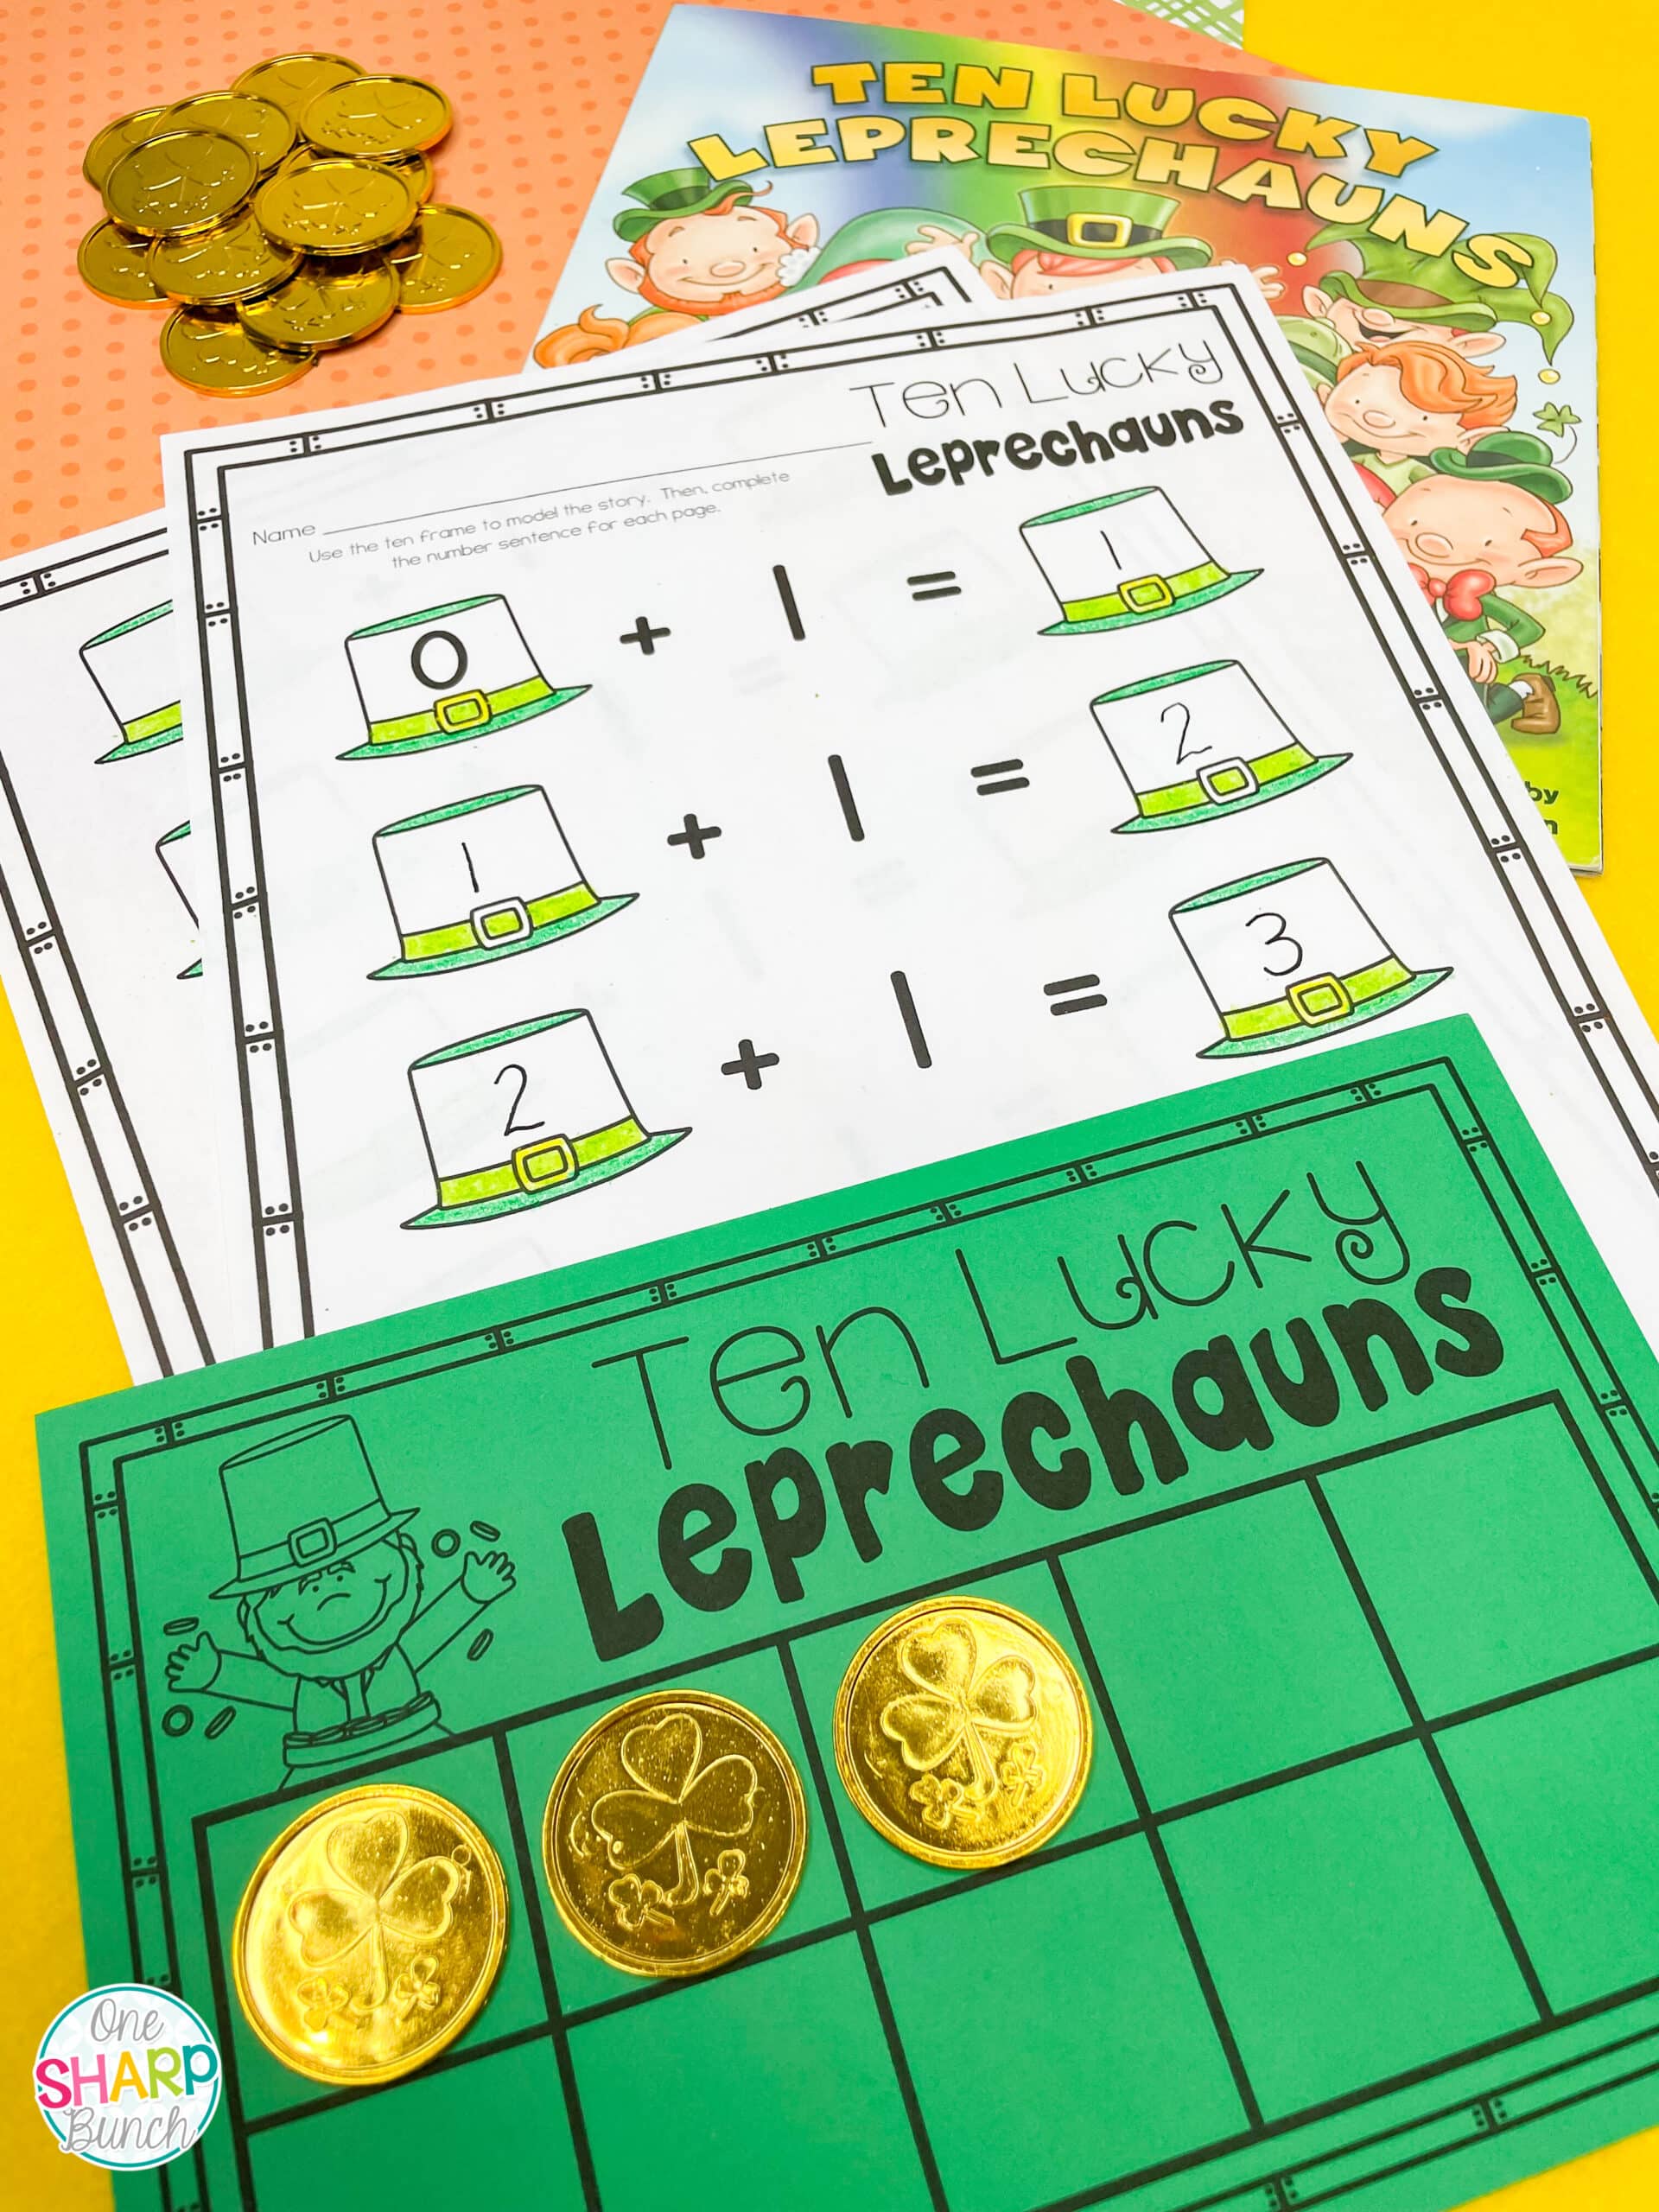 Engaging St. Patrick's Day activities for kids, including St. Patrick's Day books and a FREEBIE perfect for the story Ten Lucky Leprechauns!